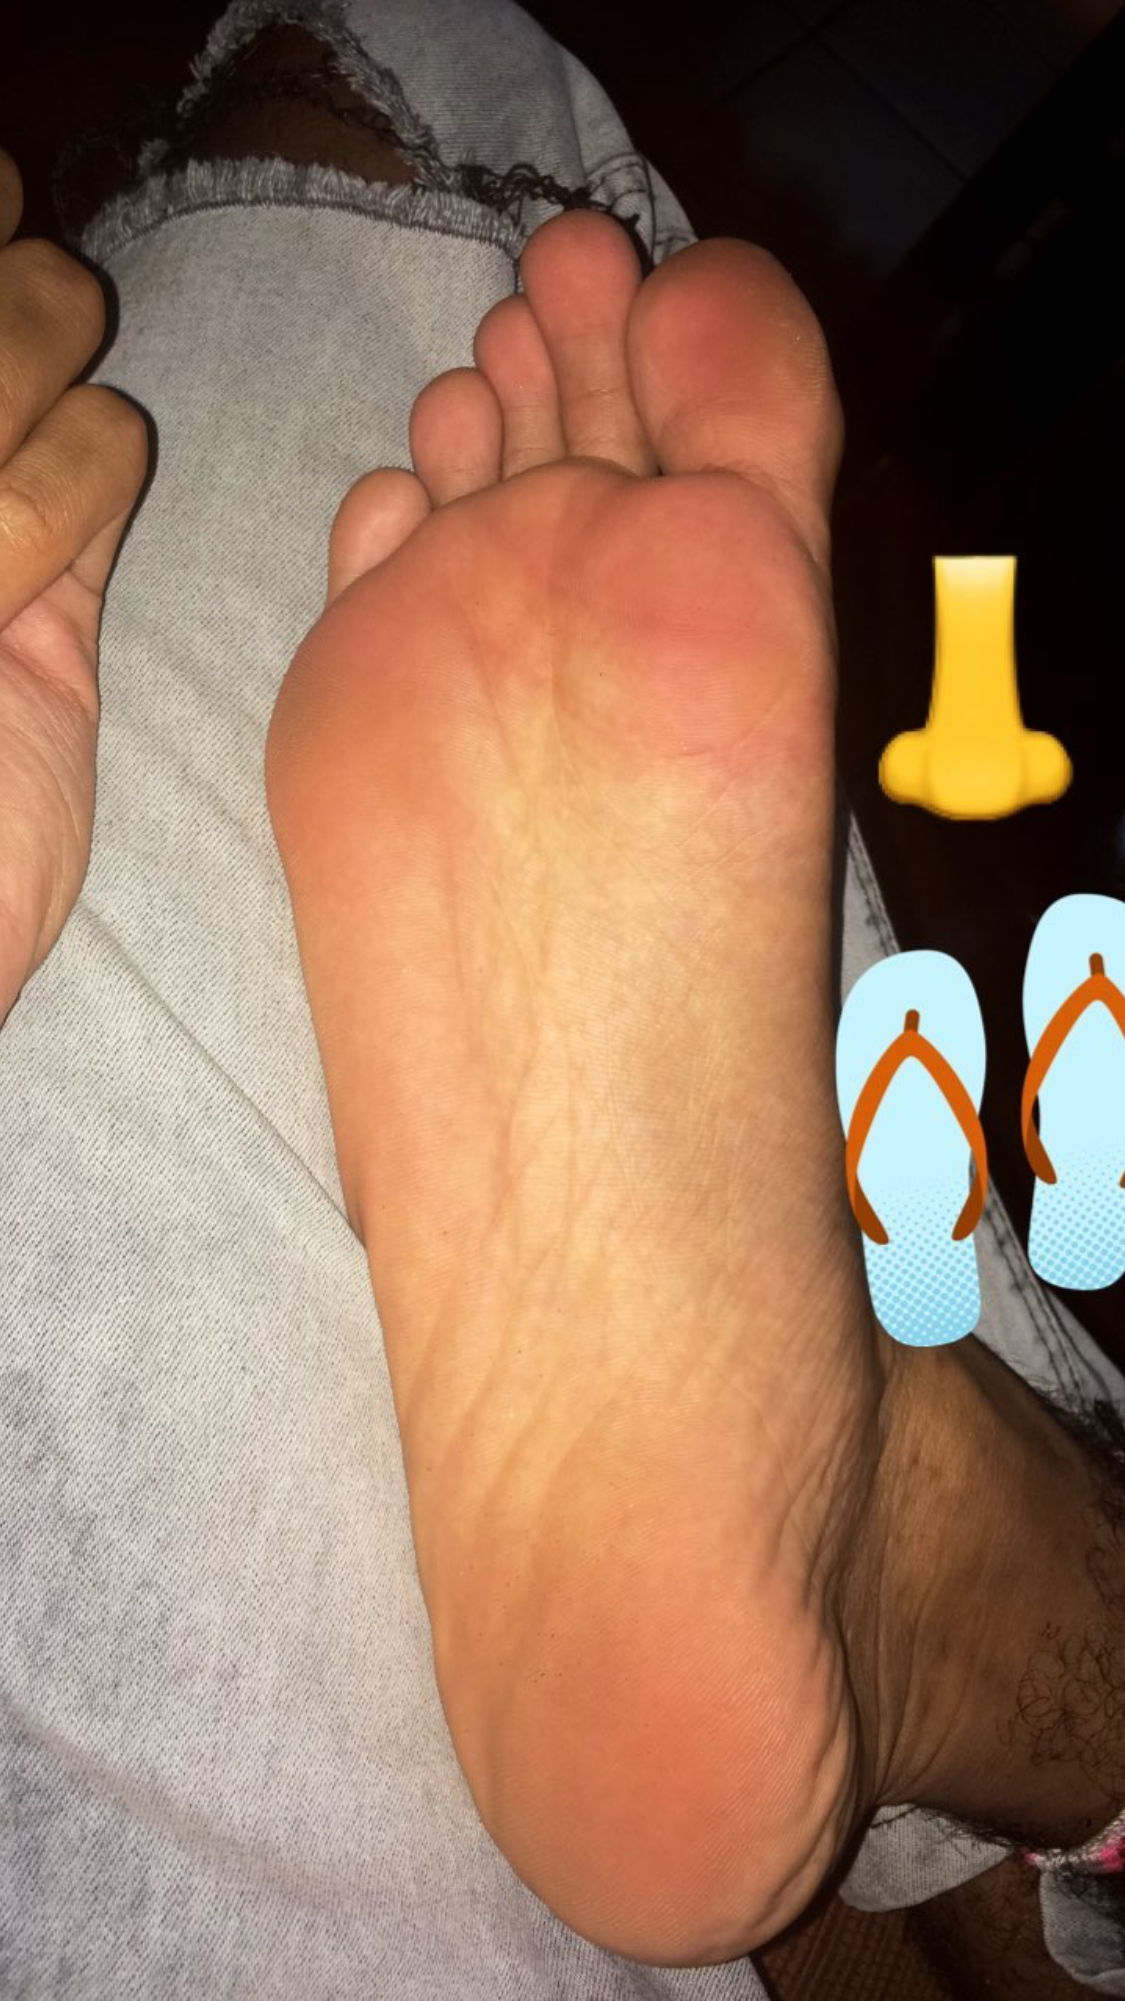 Foot and ankle ass